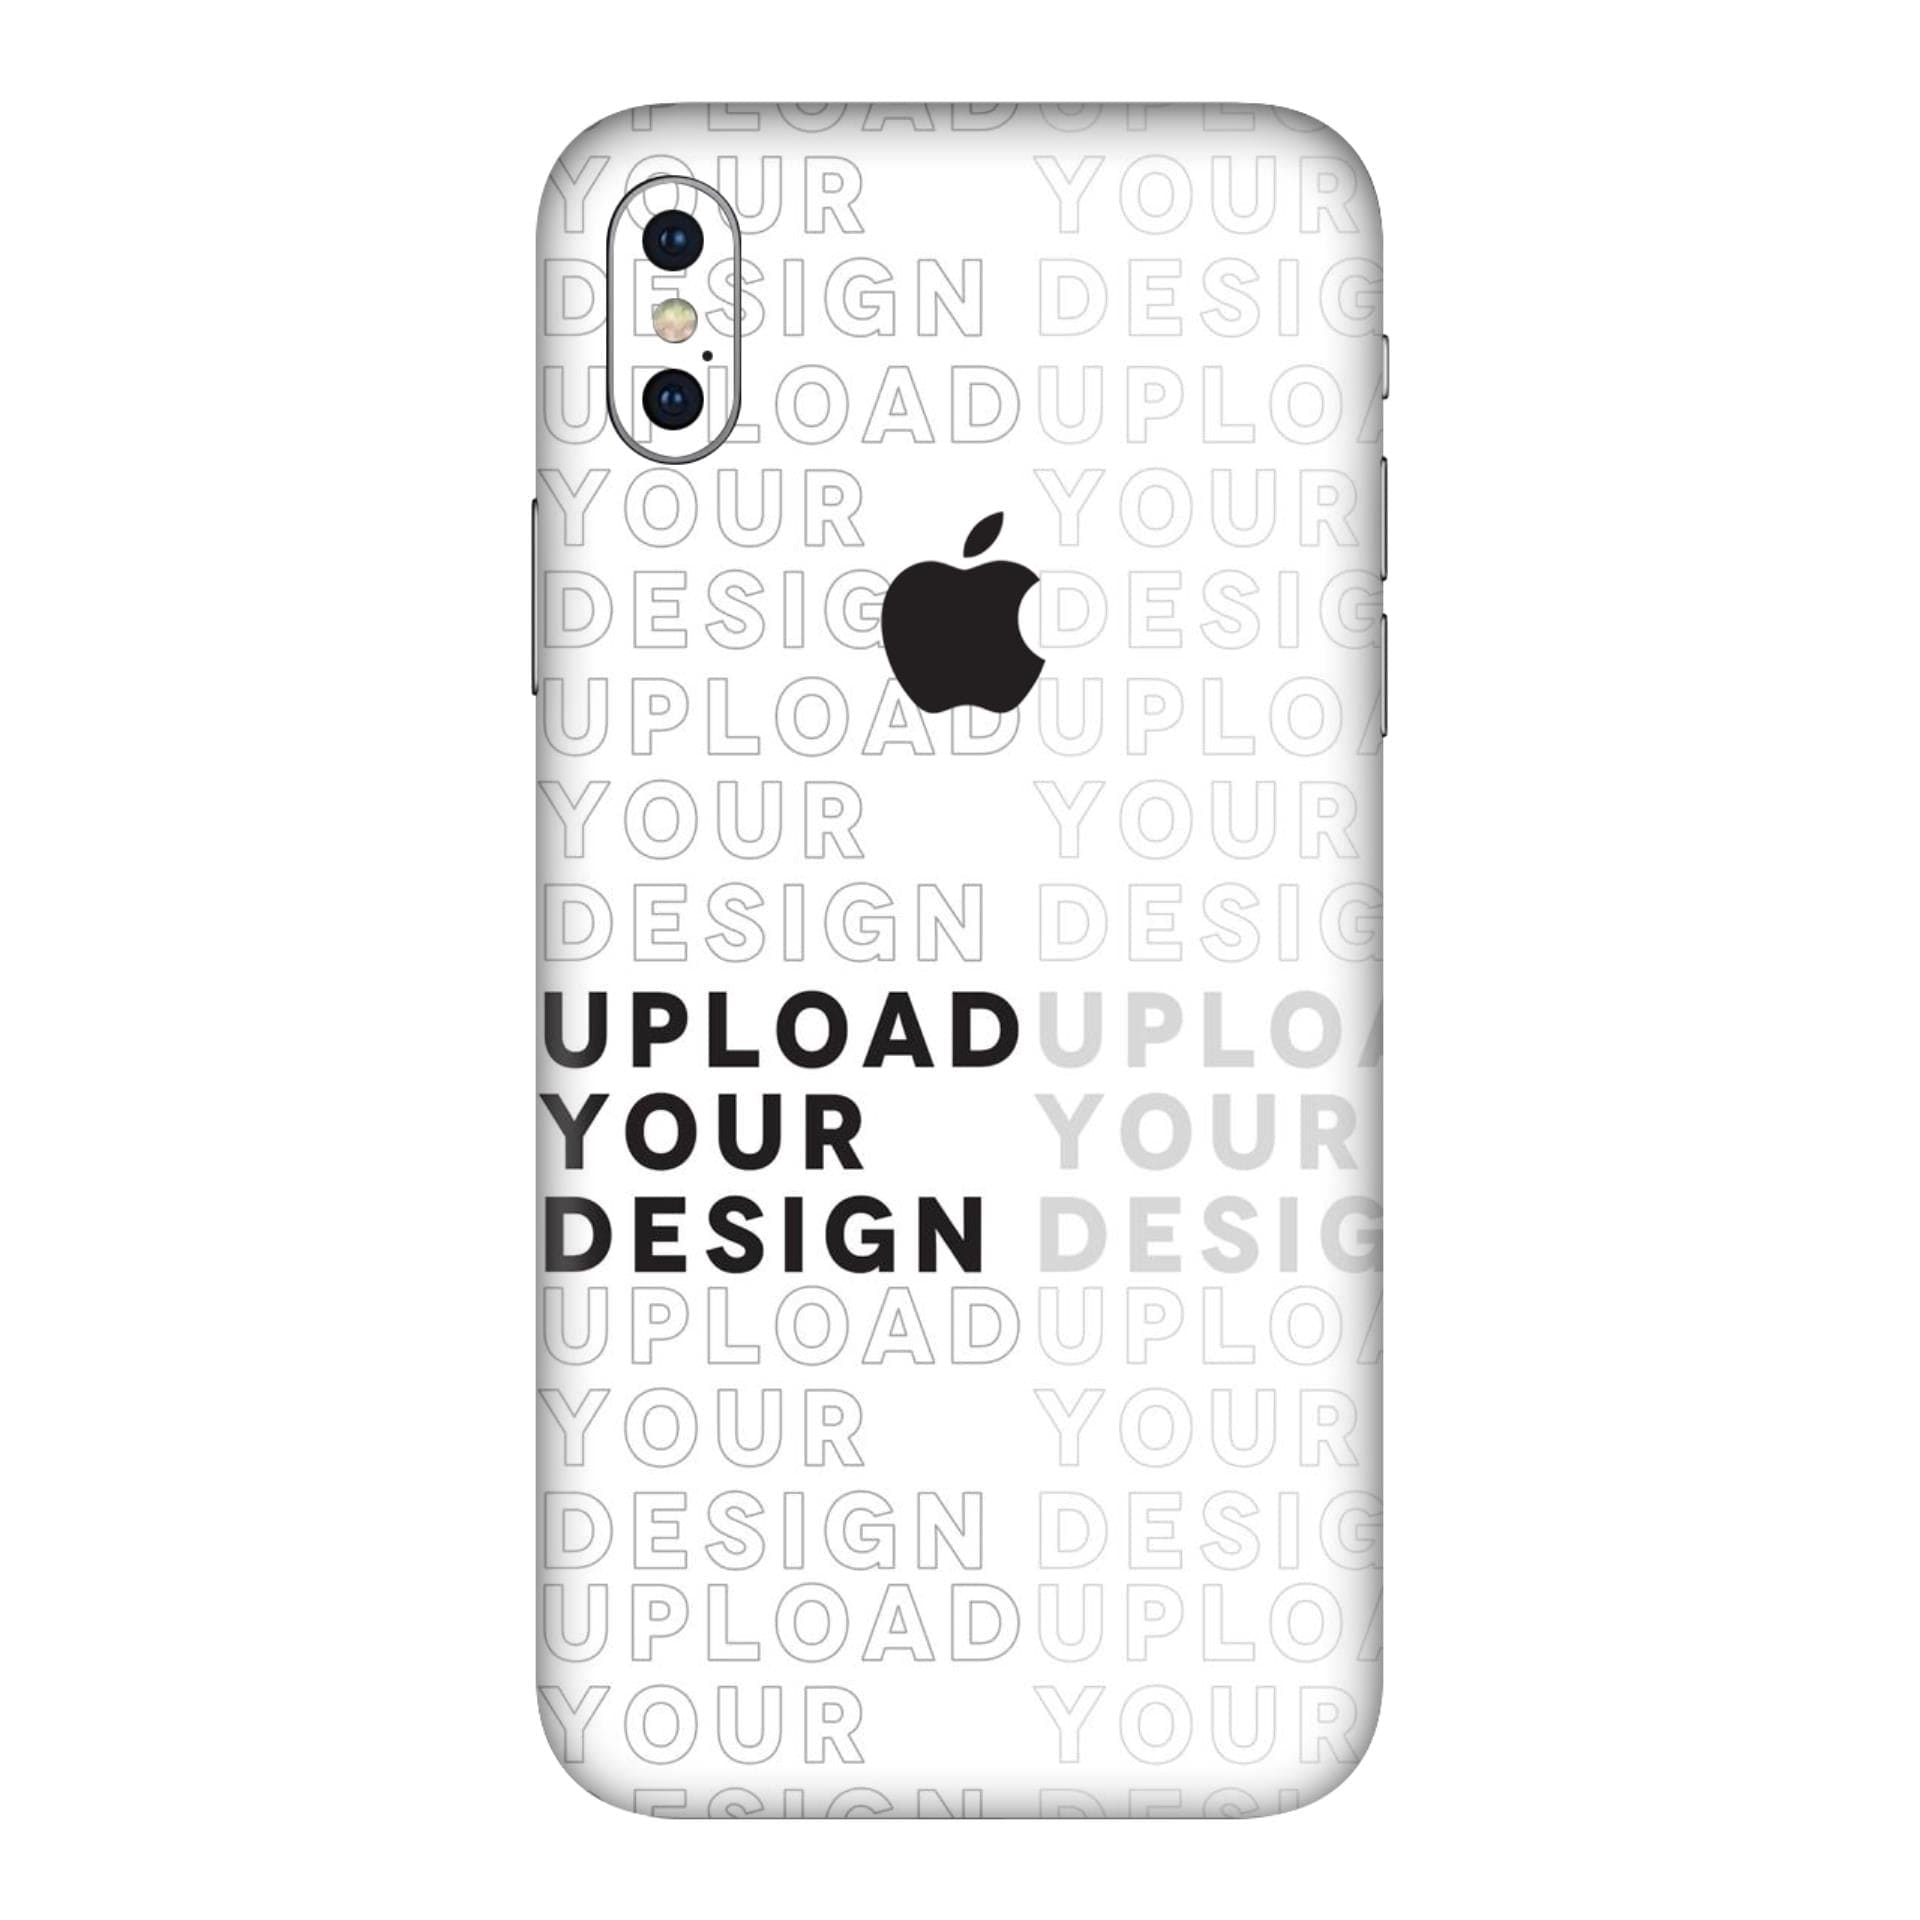 iphone XS Max UPLOAD YOUR OWN skins